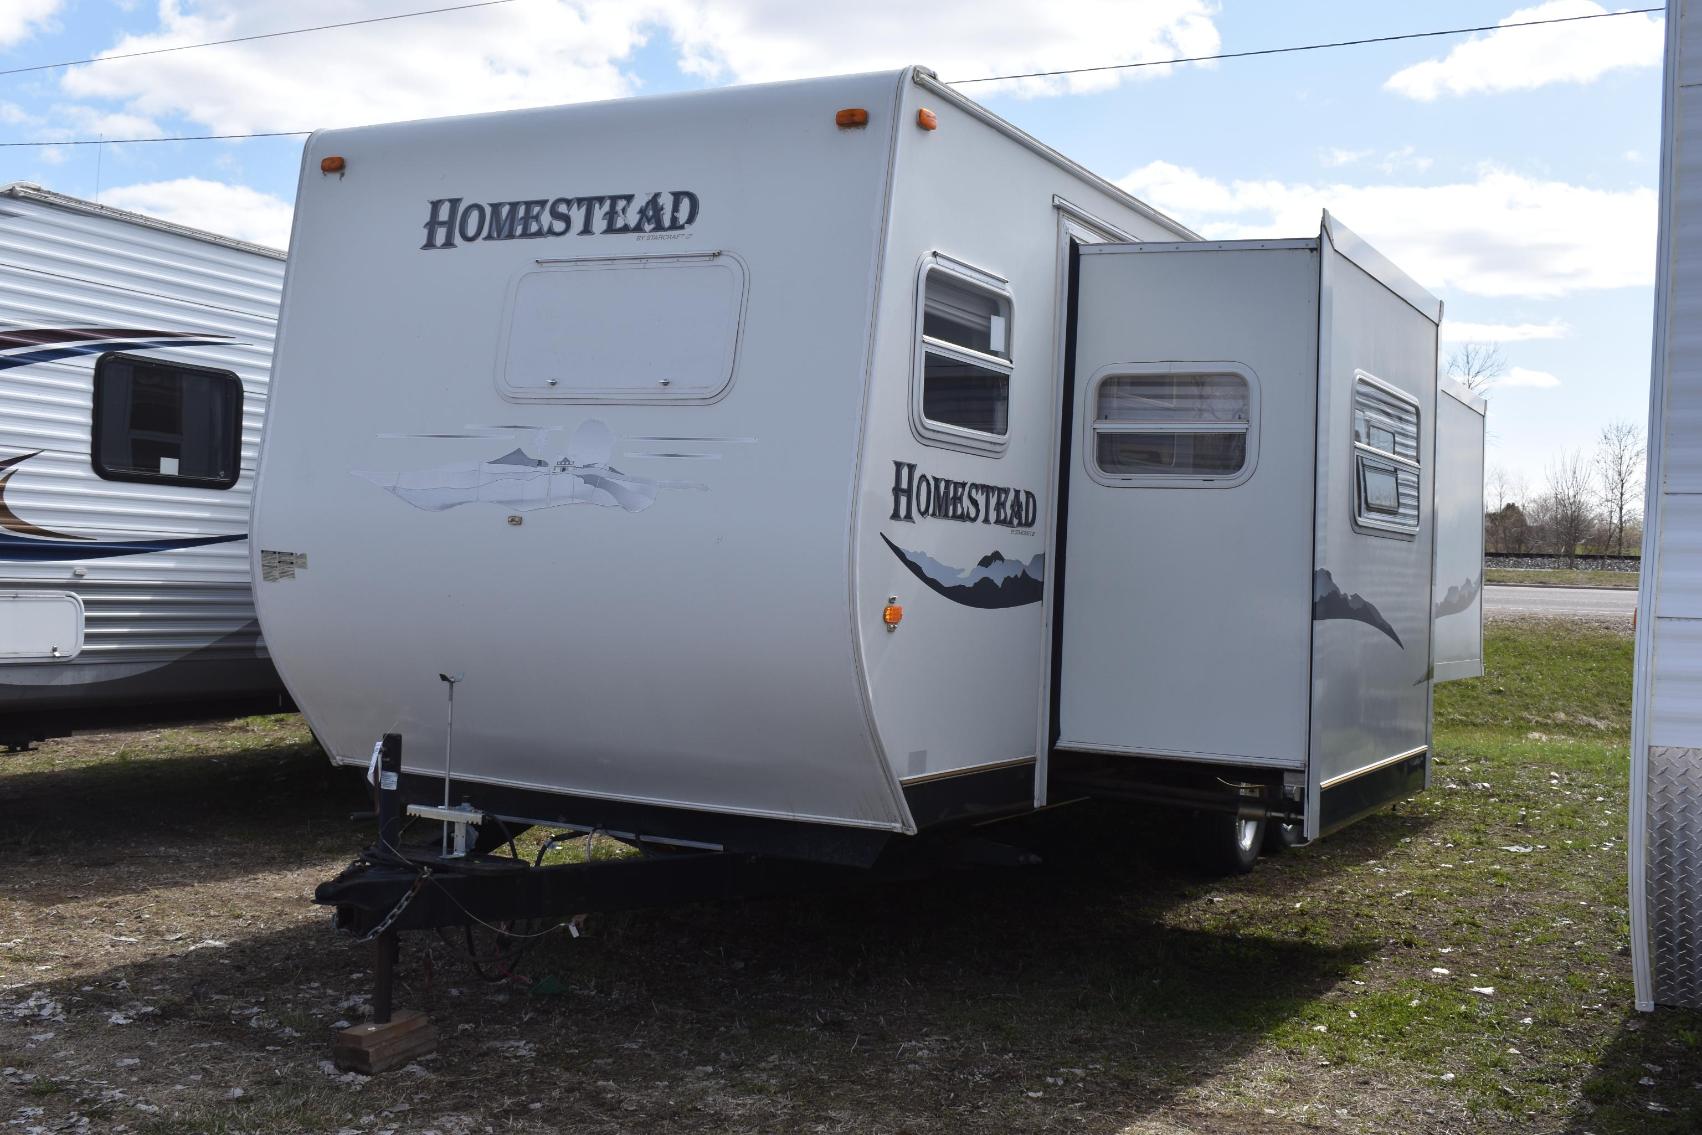 11 Campers: (2) 5th Wheels and (9) Travel Trailers, 2009 Ford Focus